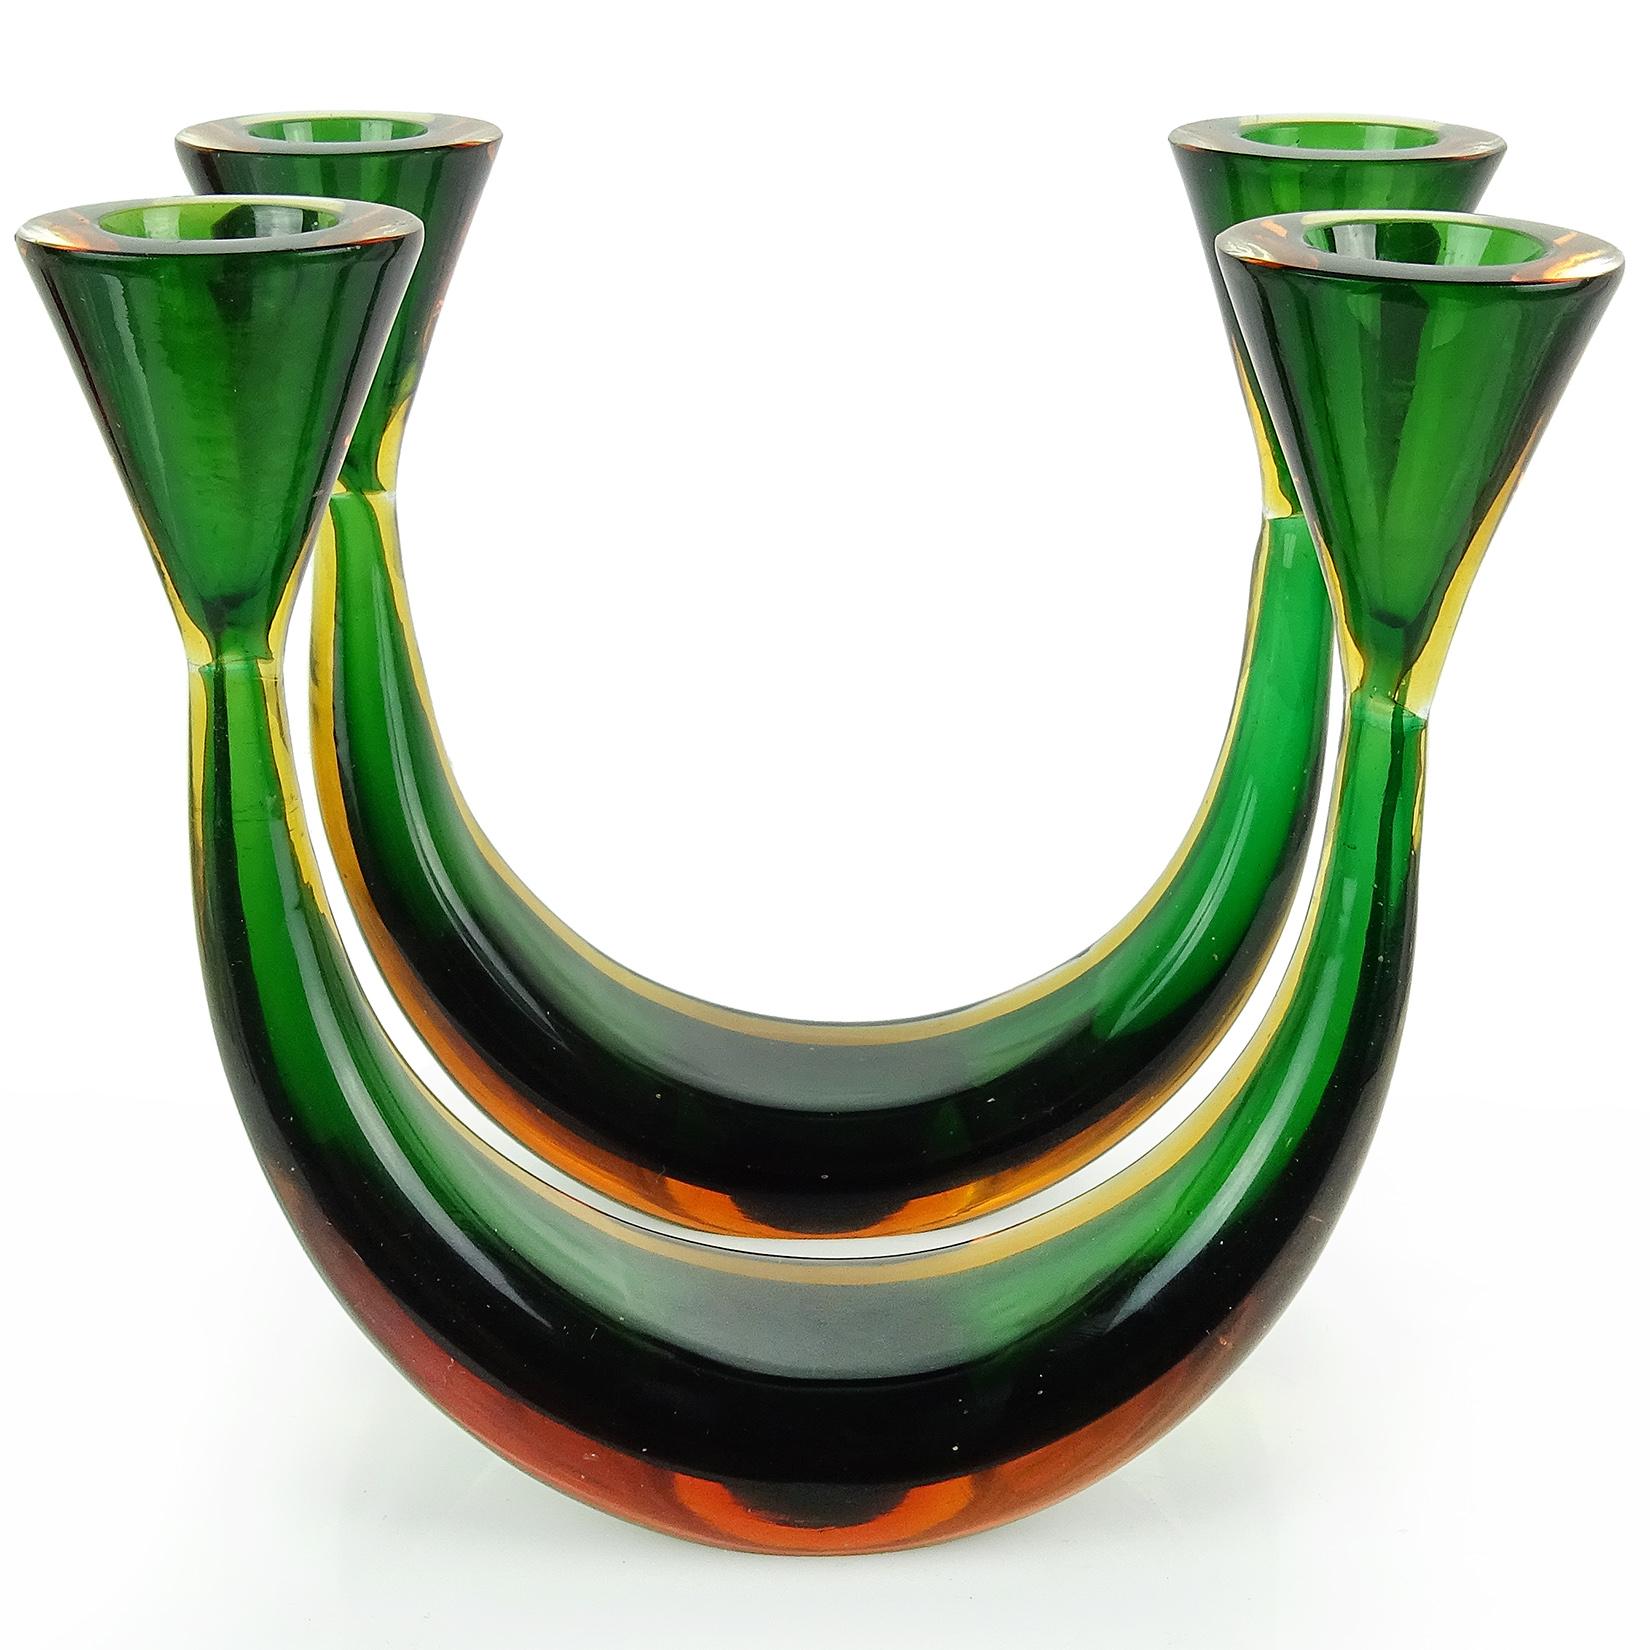 Beautiful pair of vintage Murano hand blown Sommerso green and yellow orange Italian art glass candleholder set. Created in the manner of designer Flavio Poli for Seguso Vetri D' Arte. The pieces have a Minimalist design, with a curve base and cone